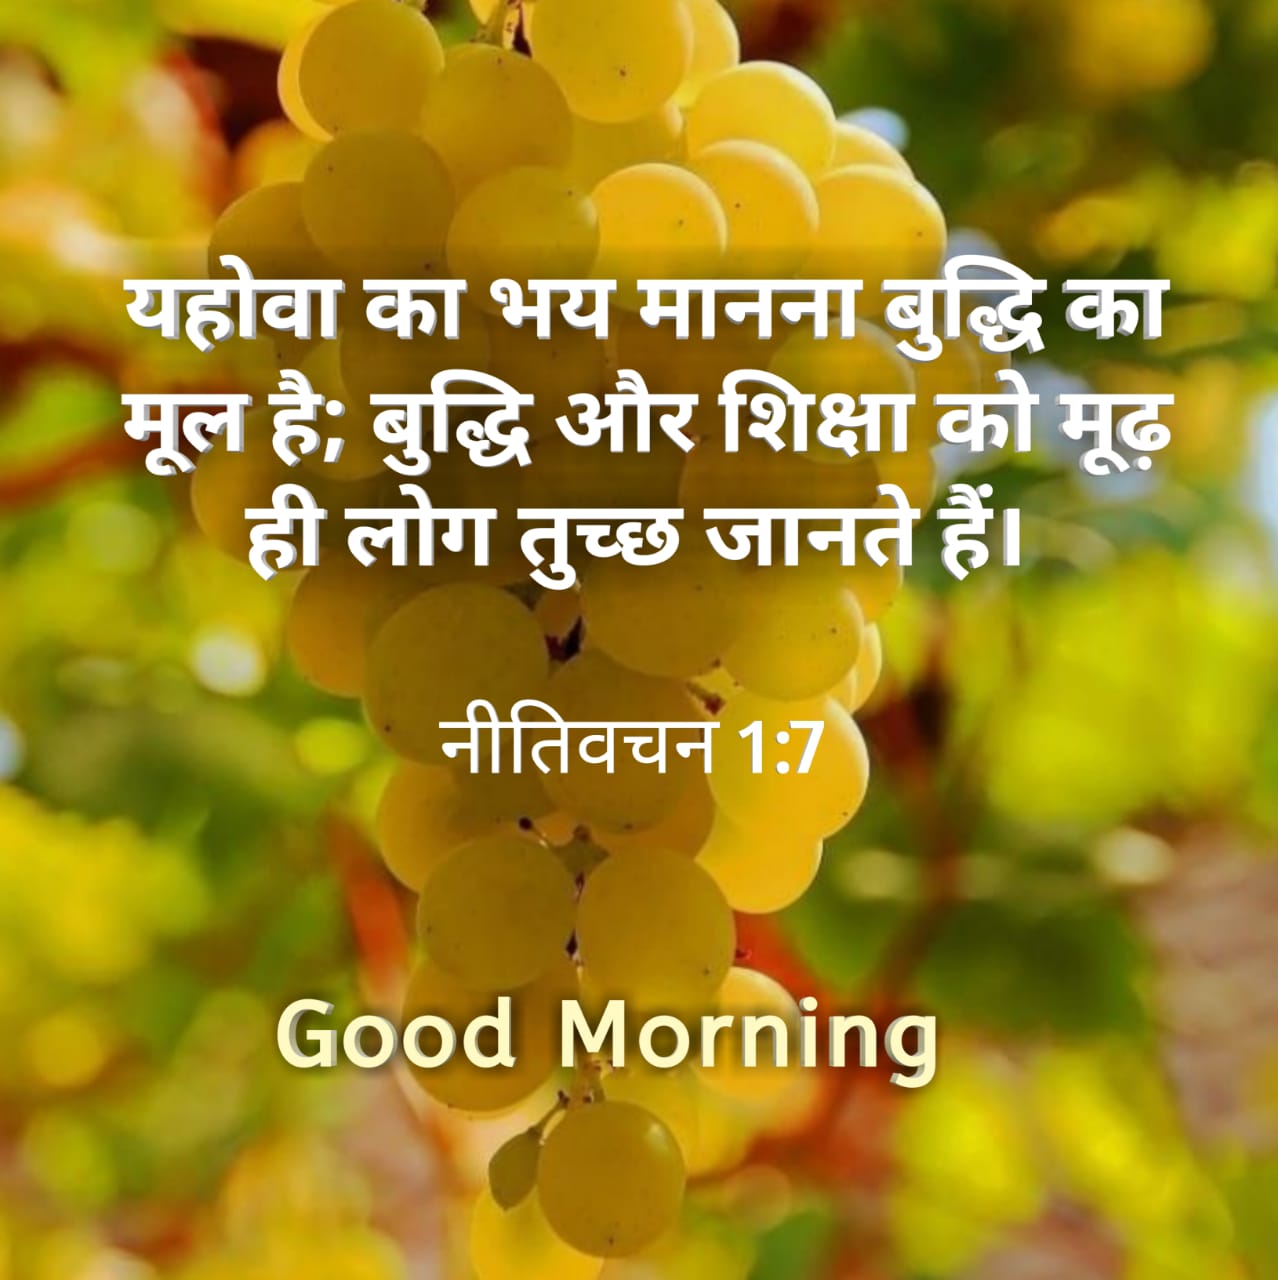 हिन्दी बाइबल वचन । Good Morning Bible Quotes images wallpaper photo download